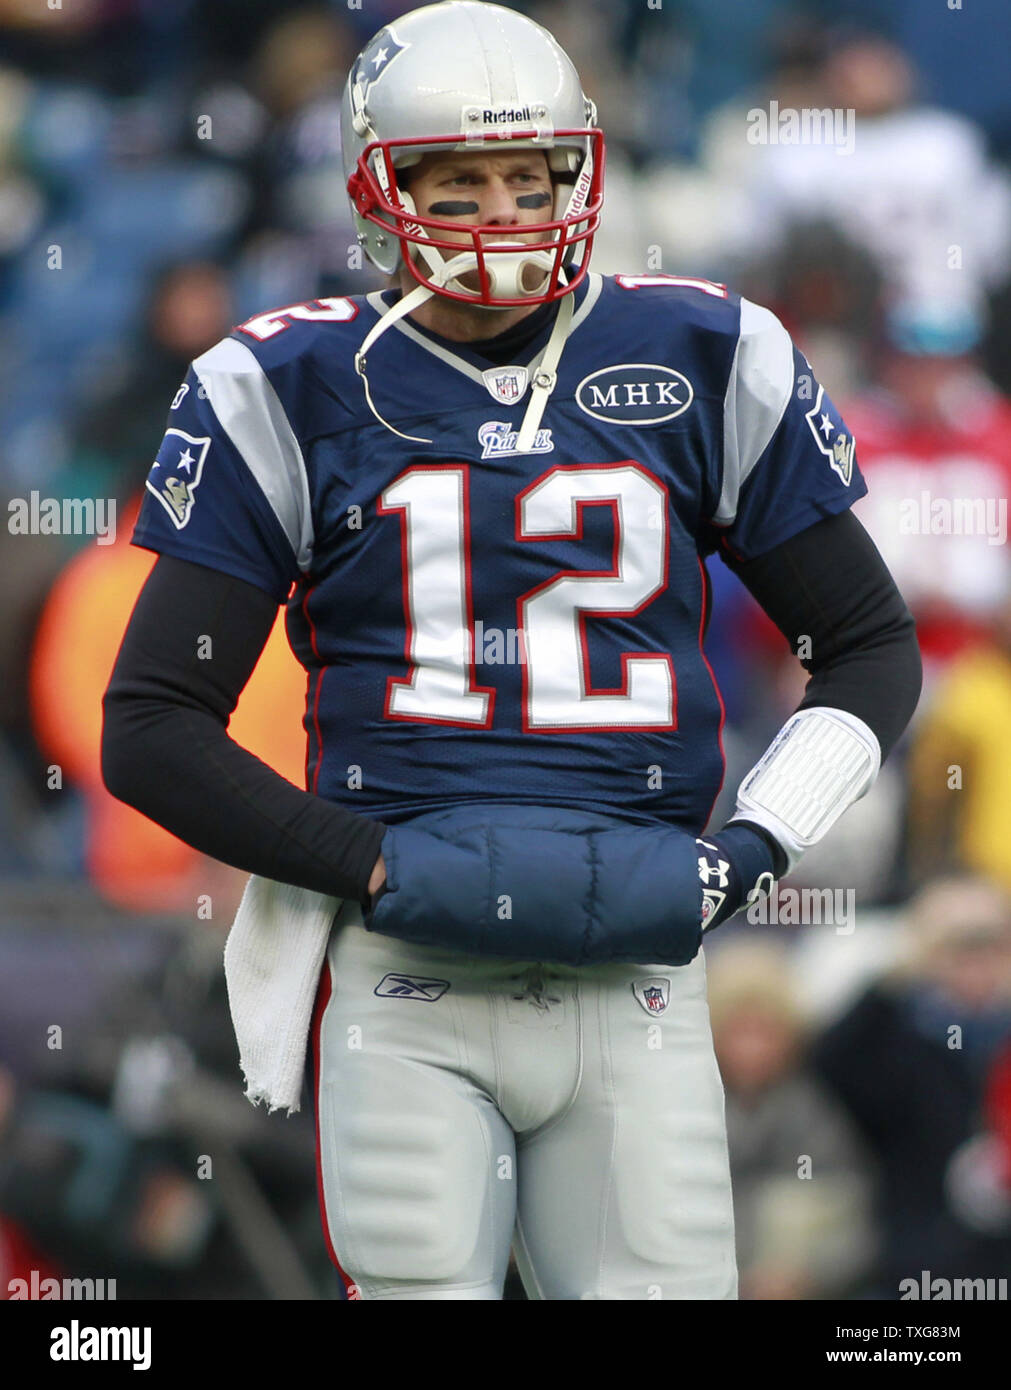 New England Patriots quarterback Tom Brady walks the field during warm ups before the AFC Championship game against the Baltimore Ravens at Gillette Stadium in Foxboro, Massachusetts on January 22, 2012.   UPI/Matthew Healey Stock Photo